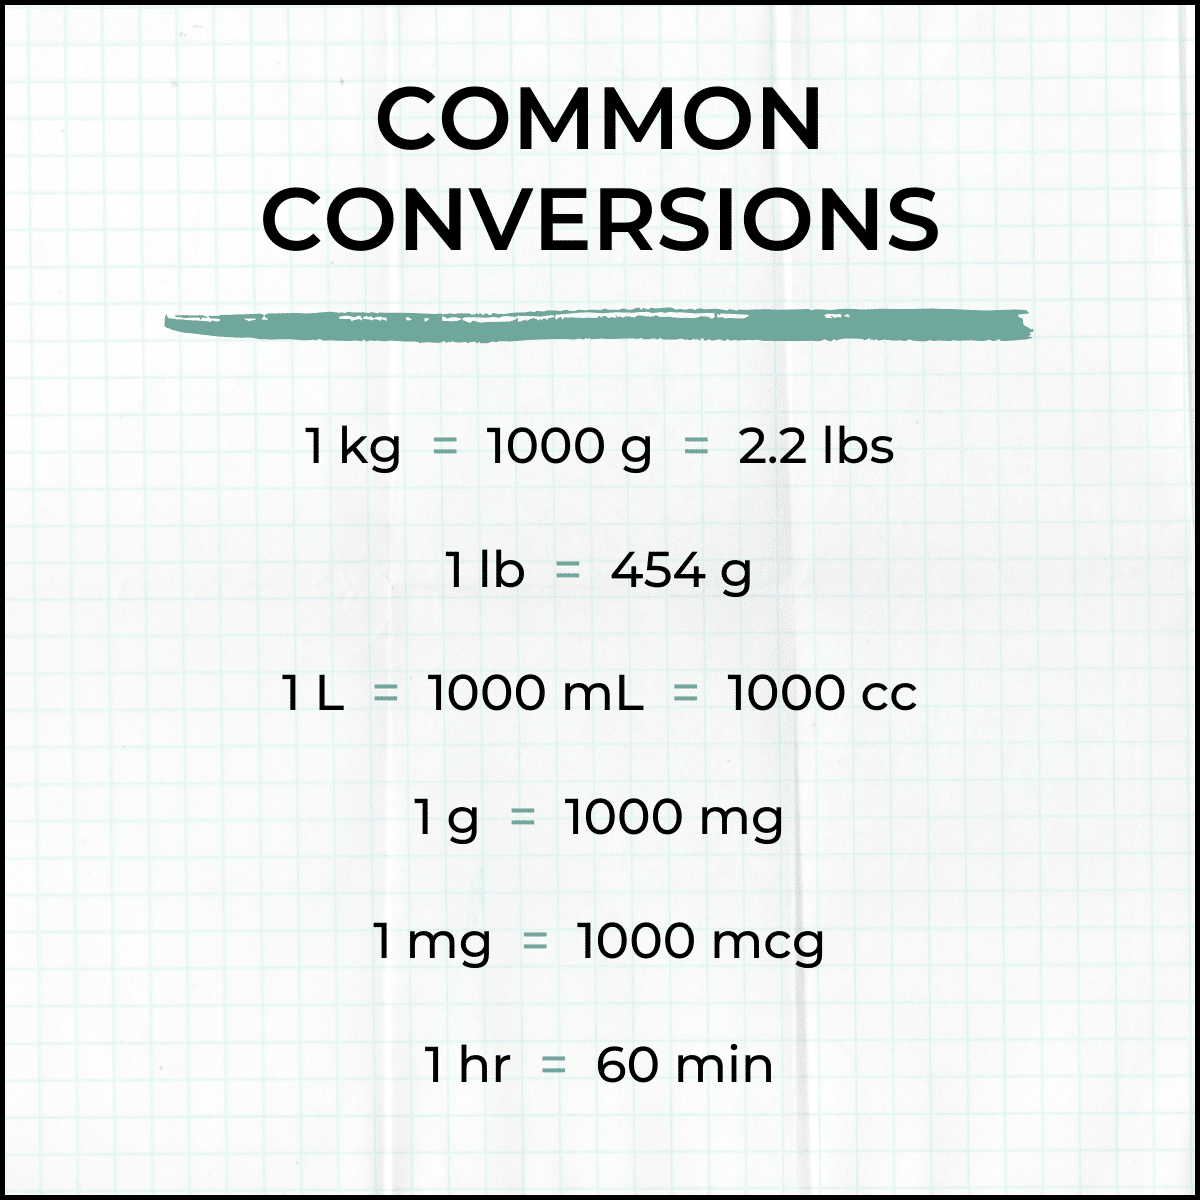 Common conversions in IV medication dosing